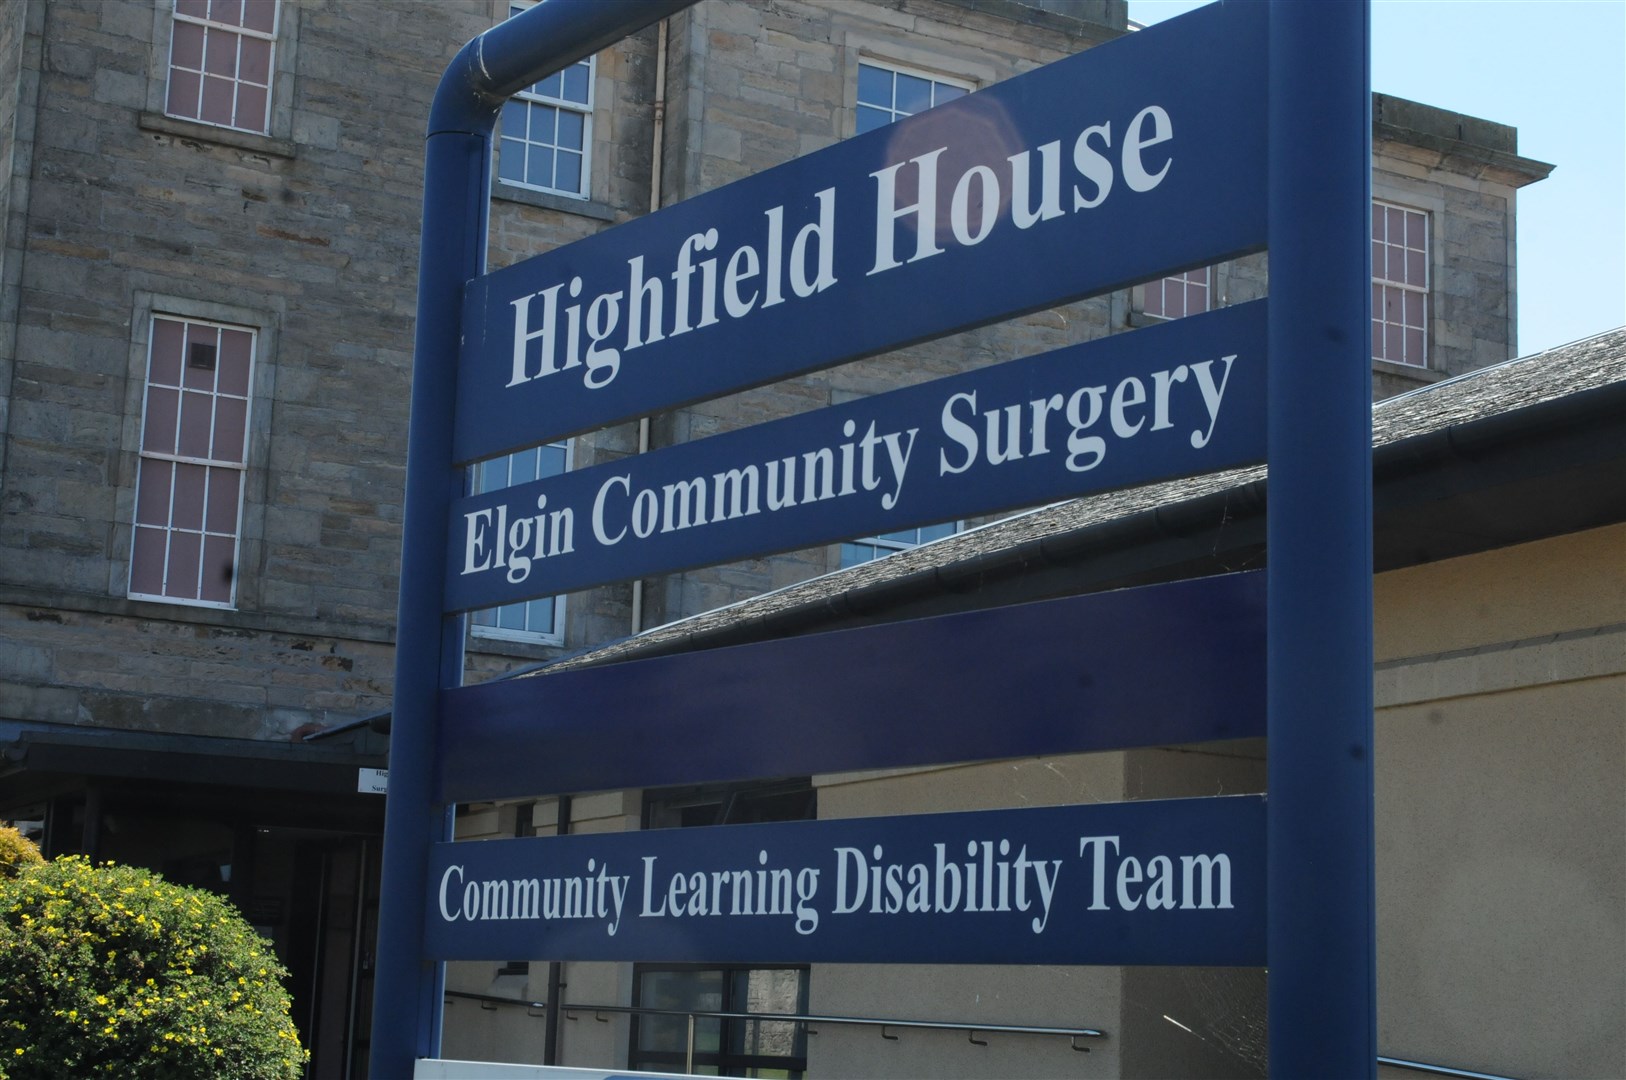 Elgin Community Surgery will close at the end of June.